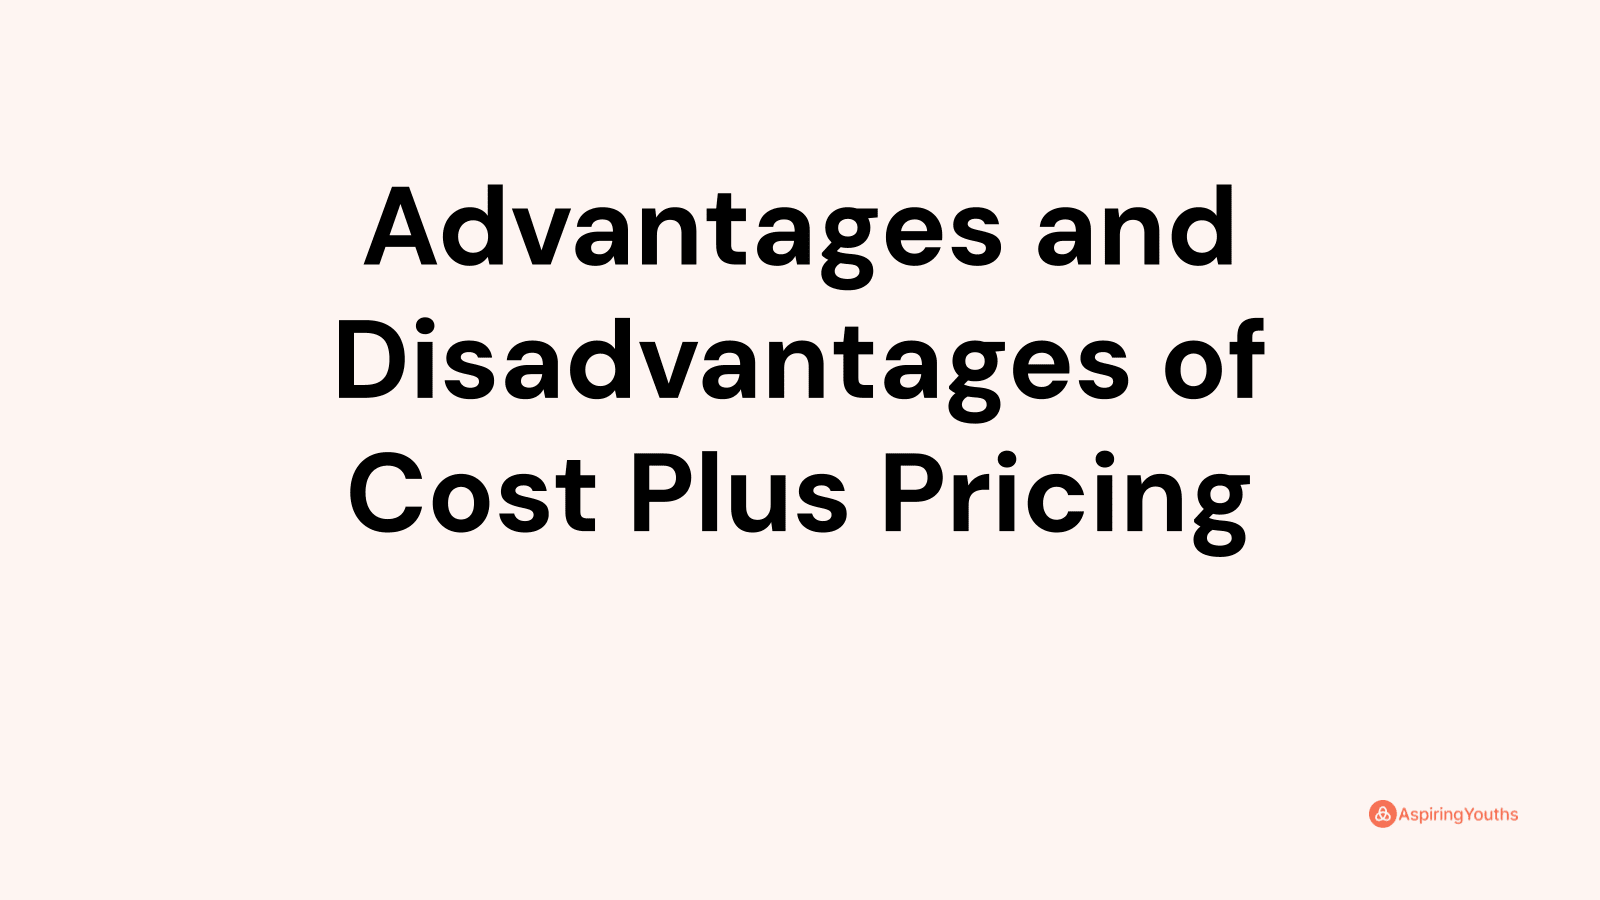 Advantages and disadvantages of Cost Plus Pricing